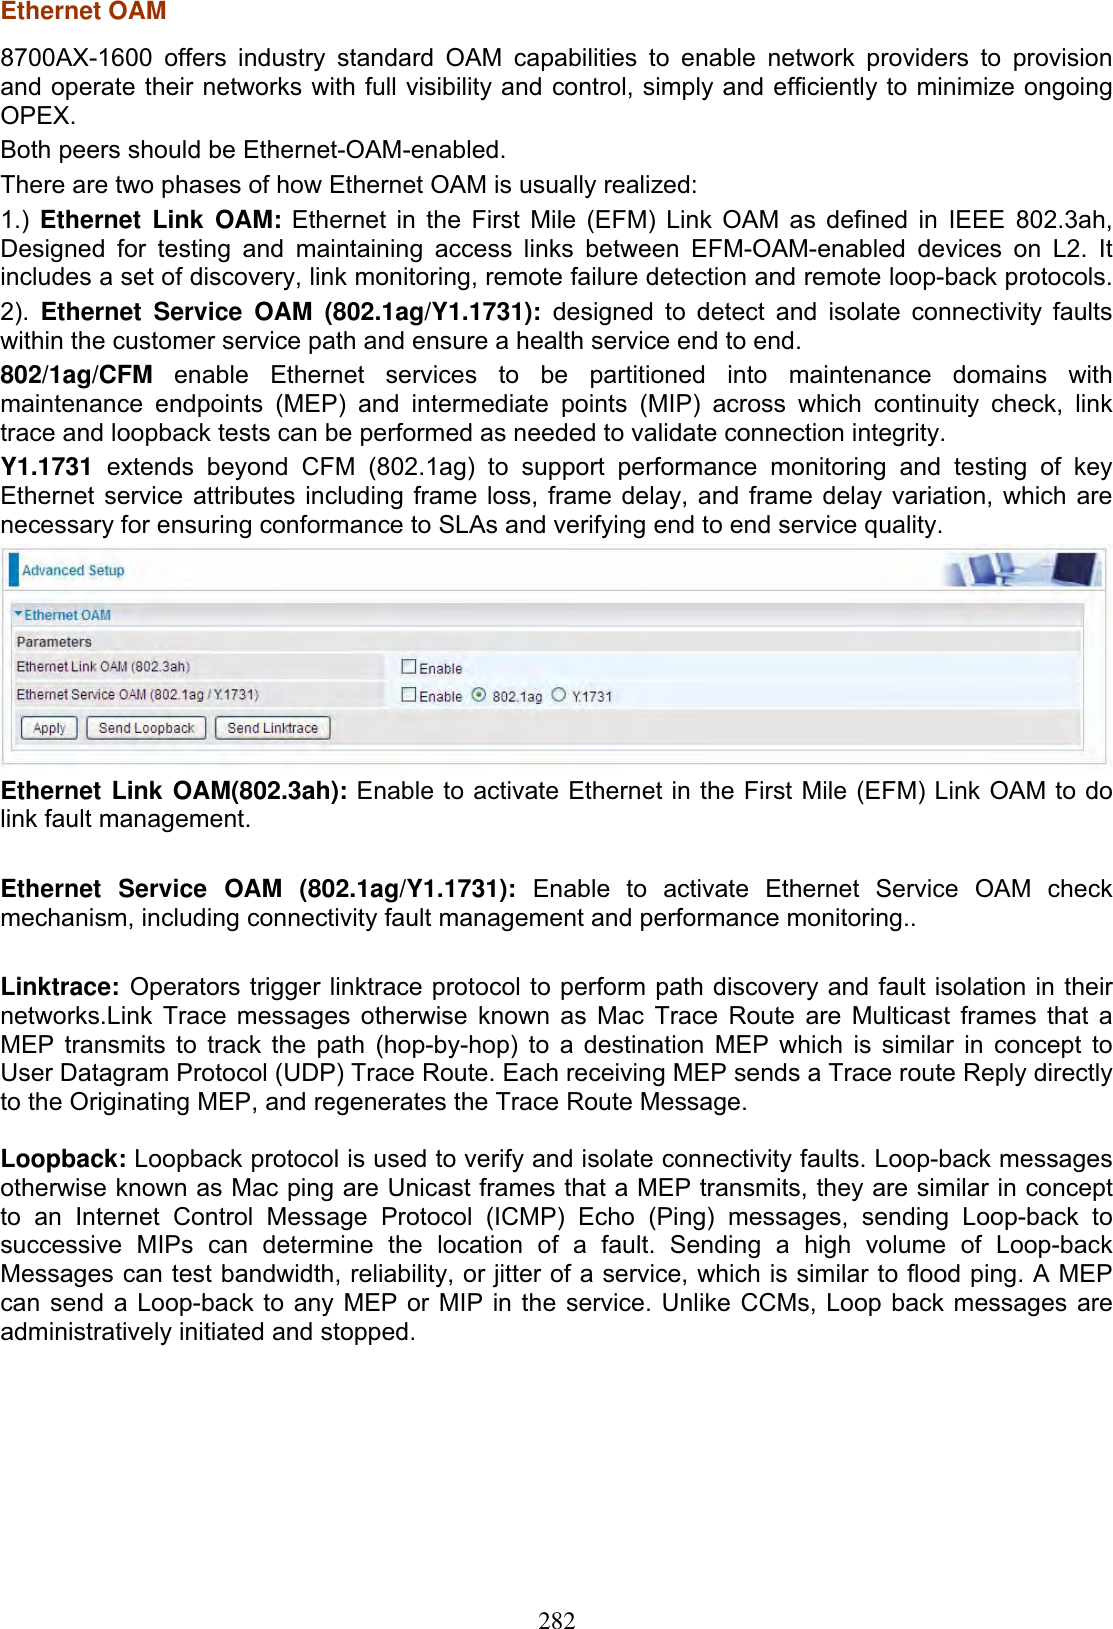 282Ethernet OAM8700AX-1600 offers industry standard OAM capabilities to enable network providers to provisionand operate their networks with full visibility and control, simply and efficiently to minimize ongoingOPEX.Both peers should be Ethernet-OAM-enabled.There are two phases of how Ethernet OAM is usually realized:1.) Ethernet Link OAM: Ethernet in the First Mile (EFM) Link OAM as defined in IEEE 802.3ah,Designed for testing and maintaining access links between EFM-OAM-enabled devices on L2. Itincludes a set of discovery, link monitoring, remote failure detection and remote loop-back protocols.2). Ethernet Service OAM (802.1ag/Y1.1731): designed to detect and isolate connectivity faultswithin the customer service path and ensure a health service end to end.802/1ag/CFM enable Ethernet services to be partitioned into maintenance domains withmaintenance endpoints (MEP) and intermediate points (MIP) across which continuity check, linktrace and loopback tests can be performed as needed to validate connection integrity.Y1.1731 extends beyond CFM (802.1ag) to support performance monitoring and testing of keyEthernet service attributes including frame loss, frame delay, and frame delay variation, which arenecessary for ensuring conformance to SLAs and verifying end to end service quality.Ethernet Link OAM(802.3ah): Enable to activate Ethernet in the First Mile (EFM) Link OAM to do link fault management.  Ethernet Service OAM (802.1ag/Y1.1731): Enable to activate Ethernet Service OAM check mechanism, including connectivity fault management and performance monitoring.. Linktrace: Operators trigger linktrace protocol to perform path discovery and fault isolation in their networks.Link Trace messages otherwise known as Mac Trace Route are Multicast frames that a MEP transmits to track the path (hop-by-hop) to a destination MEP which is similar in concept to User Datagram Protocol (UDP) Trace Route. Each receiving MEP sends a Trace route Reply directly to the Originating MEP, and regenerates the Trace Route Message.Loopback: Loopback protocol is used to verify and isolate connectivity faults. Loop-back messages otherwise known as Mac ping are Unicast frames that a MEP transmits, they are similar in concept to an Internet Control Message Protocol (ICMP) Echo (Ping) messages, sending Loop-back to successive MIPs can determine the location of a fault. Sending a high volume of Loop-back Messages can test bandwidth, reliability, or jitter of a service, which is similar to flood ping. A MEP can send a Loop-back to any MEP or MIP in the service. Unlike CCMs, Loop back messages are administratively initiated and stopped. 